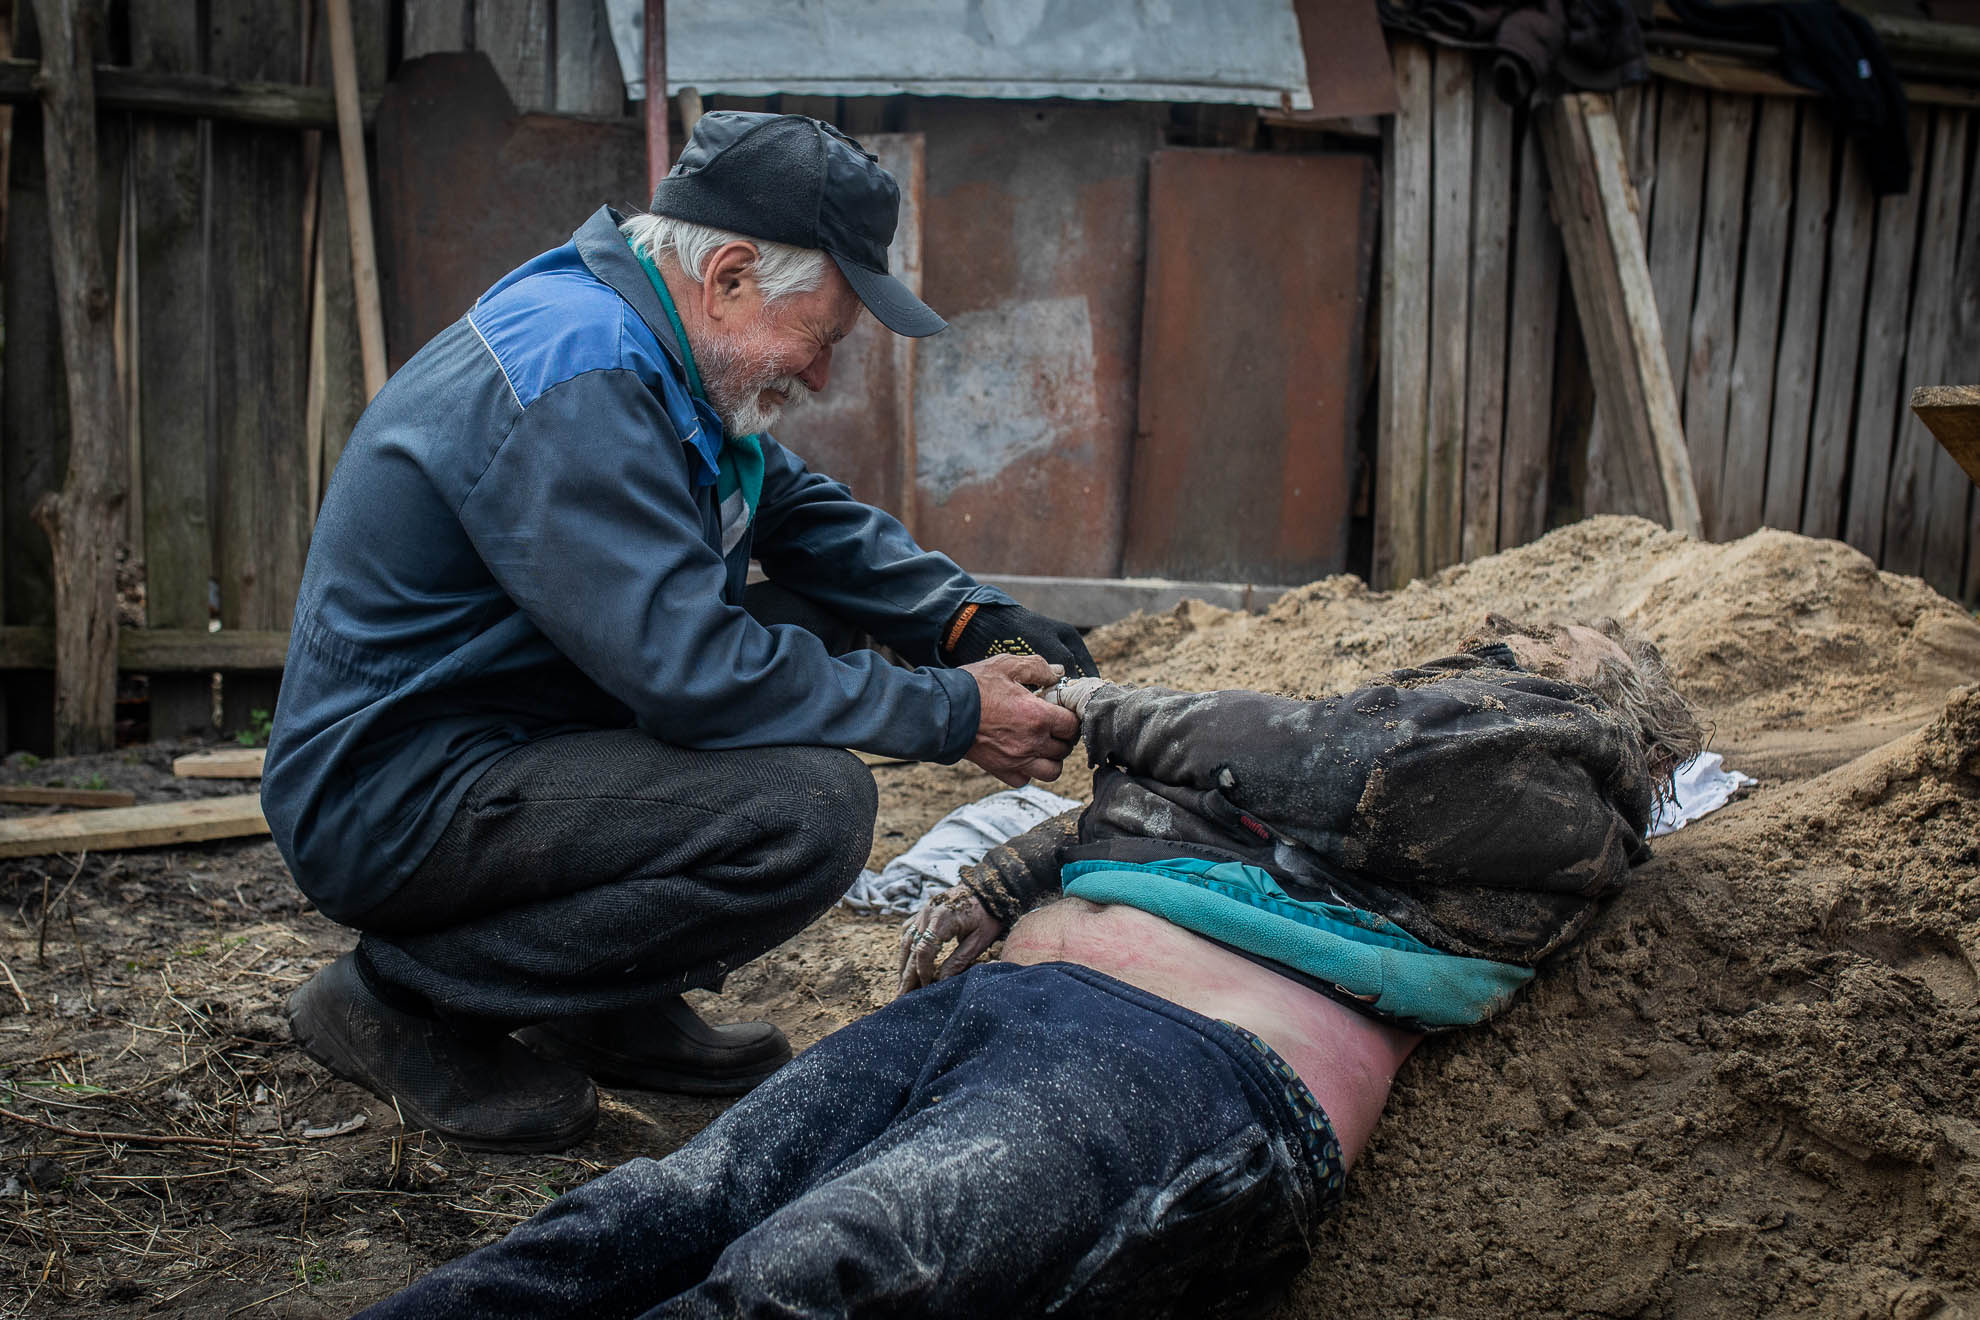 Valeriy cries next to the body of his eldest son, Oleksiy, shot dead in the center of Bucha on March 12. His body, which had been temporarily buried in the garden of his home, was dug up on April 8 to be transferred to a morgue for an autopsy before being cremated. The disinterment was attended by Valeriy himself along with his other son, Andriy, and family, friends, and police officers.